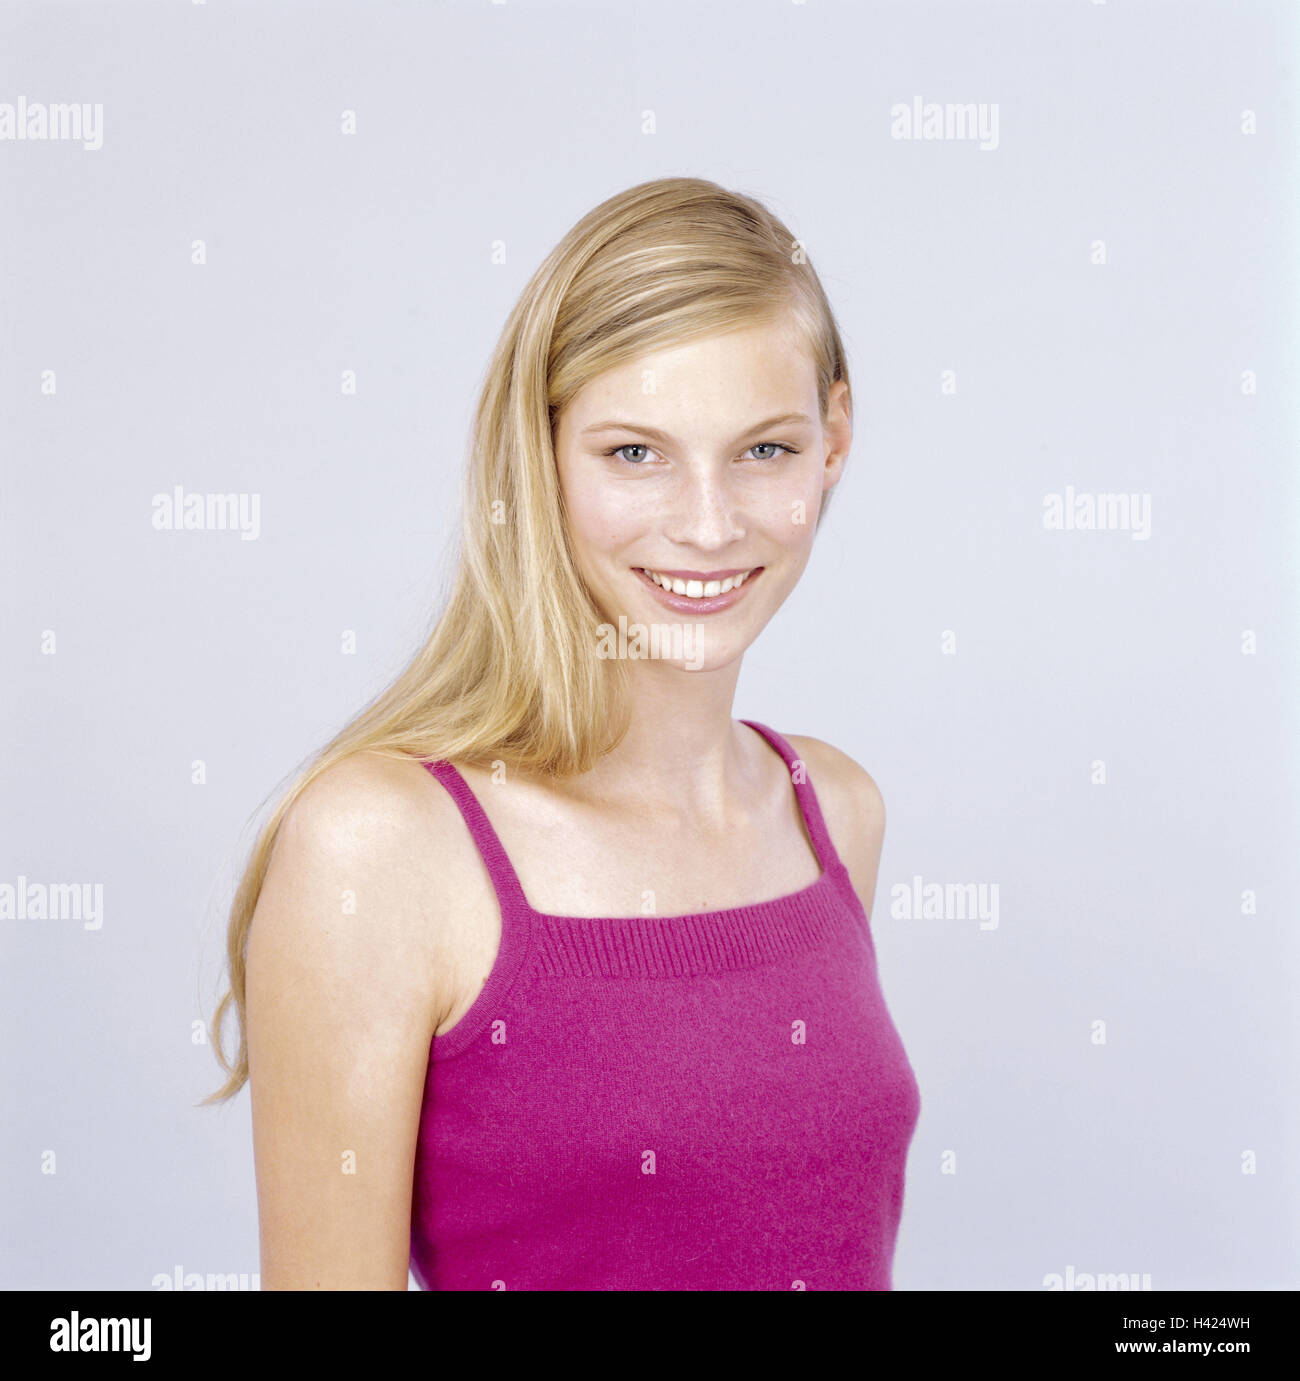 Youthfully, blond, view camera, smile, portrait, freely for Großflächenplakatierung 16-20 years, 20-30 years, woman, young, long-haired, top, naturalness, do not stand, friendly, balance, happy, joy, happy, luck, mood positive, studio Stock Photo